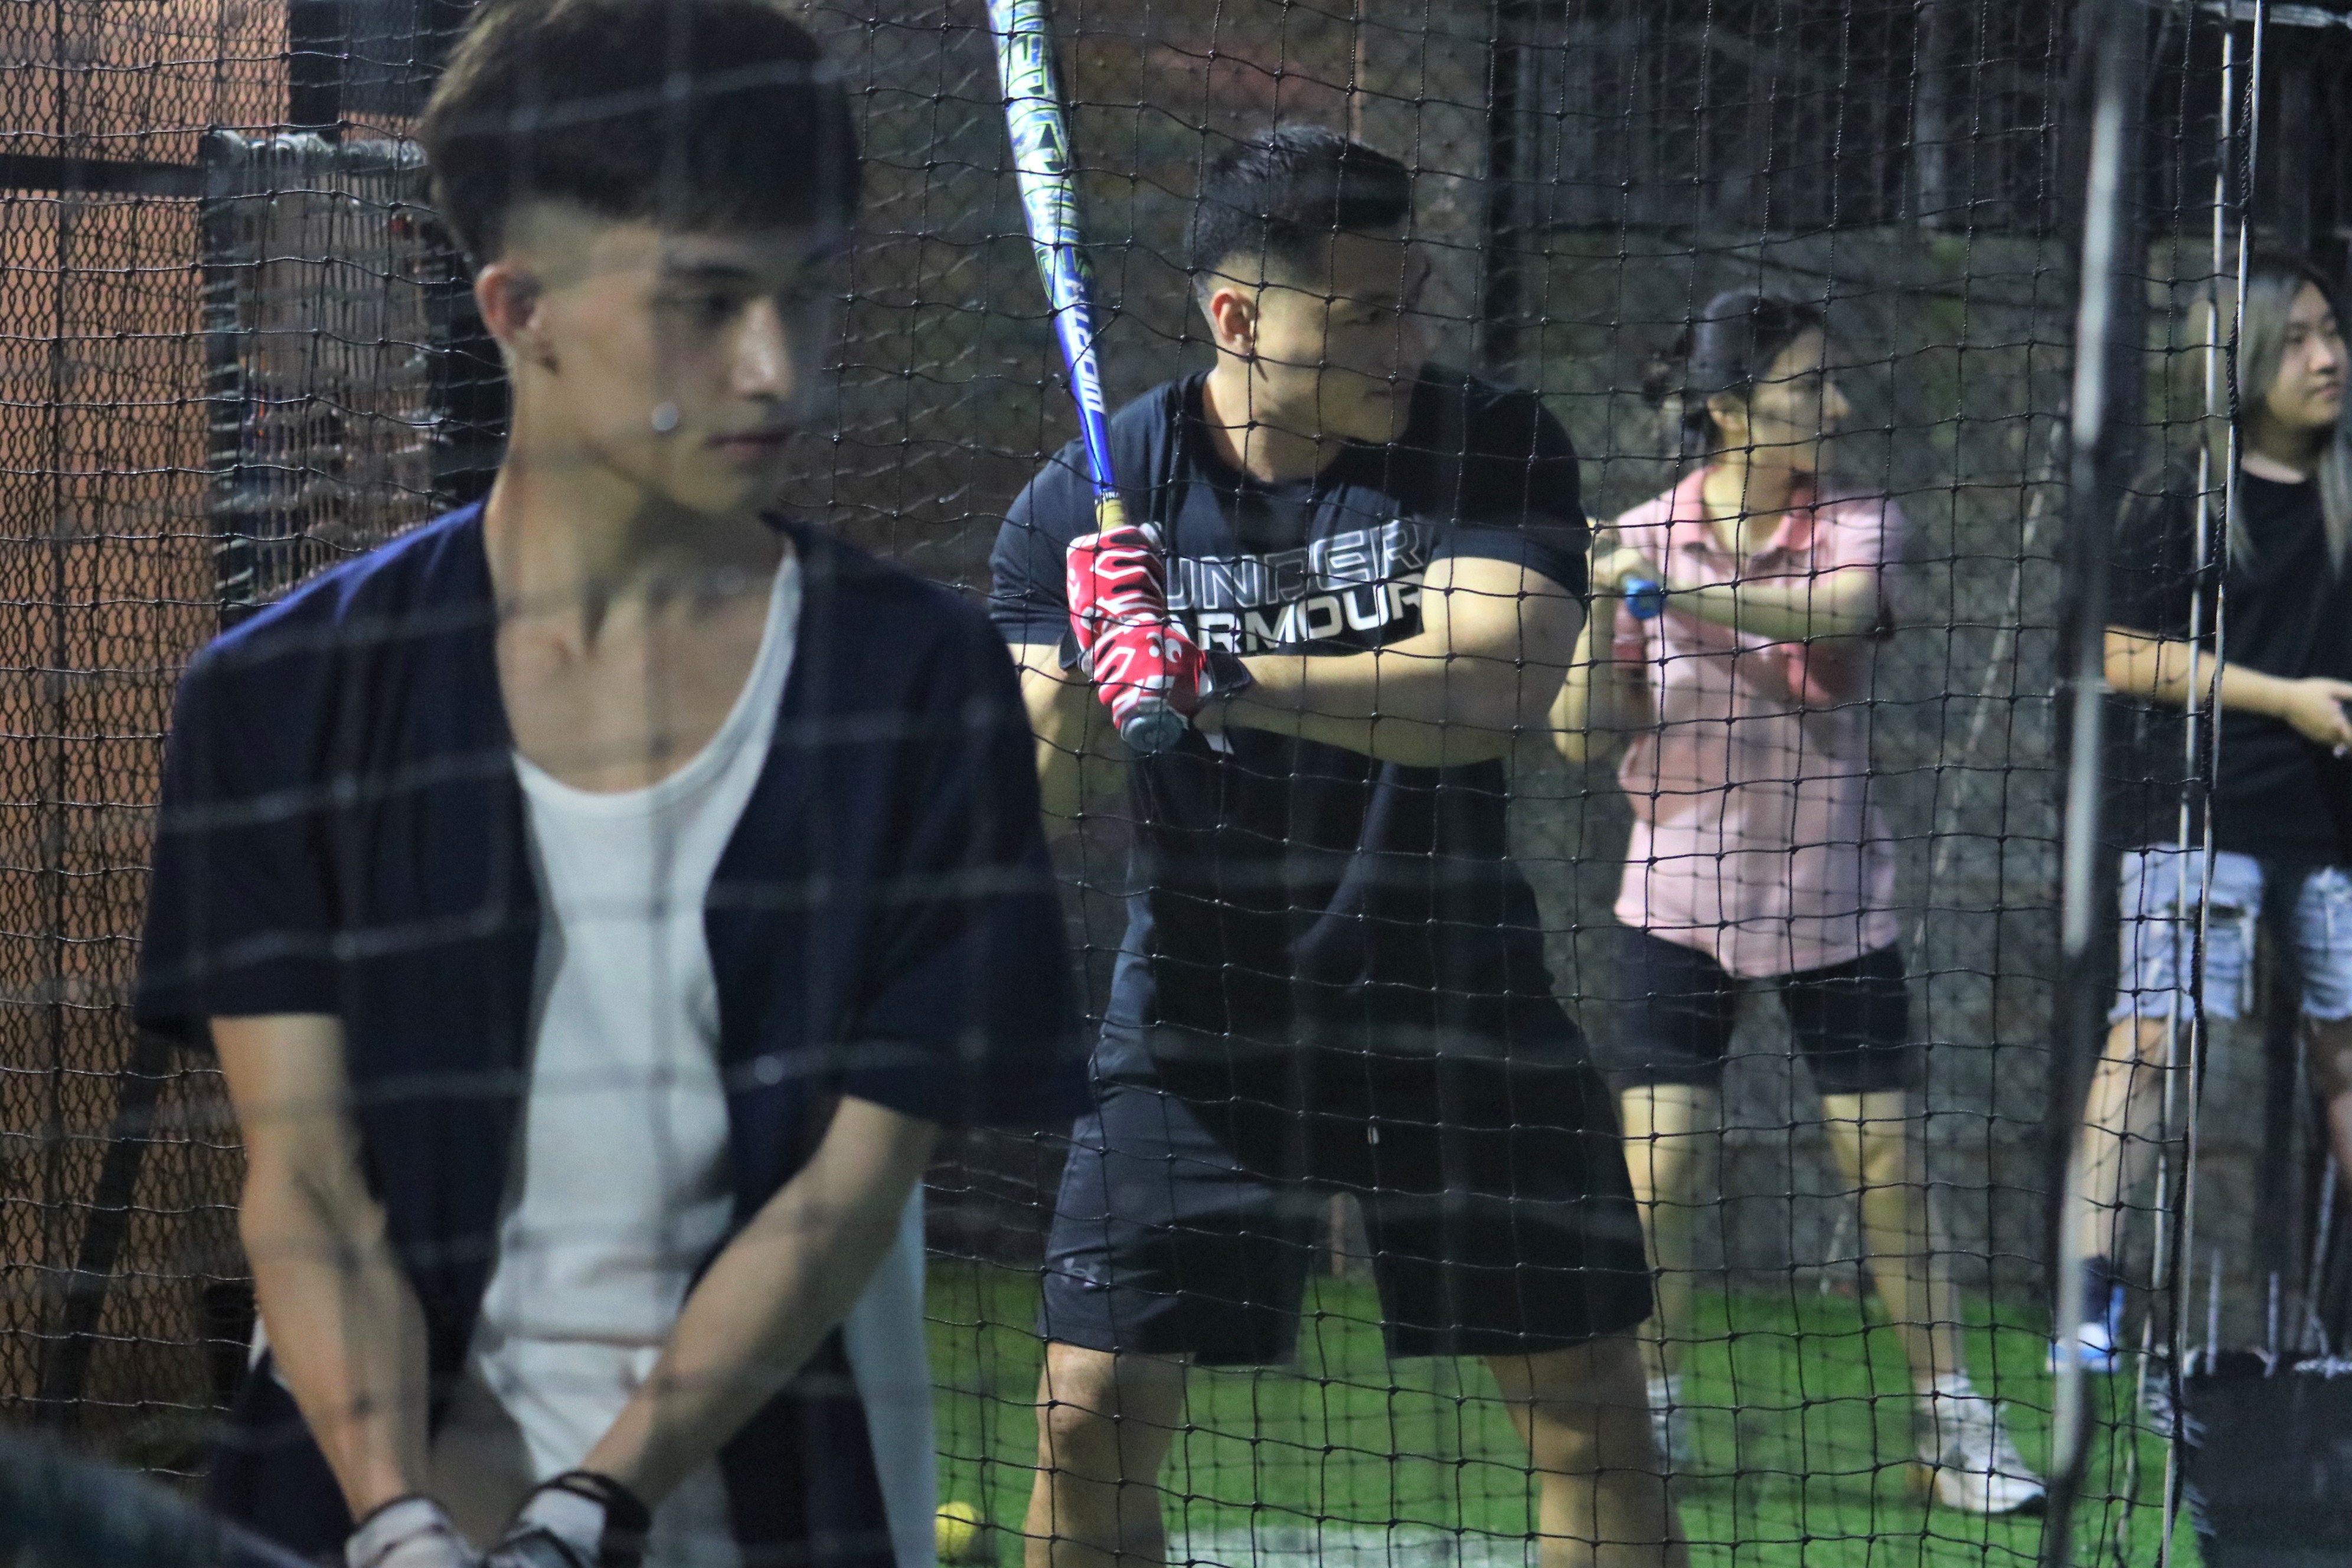 Take me out to the ball game: Batting cages pitch fun times in Ho Minh City